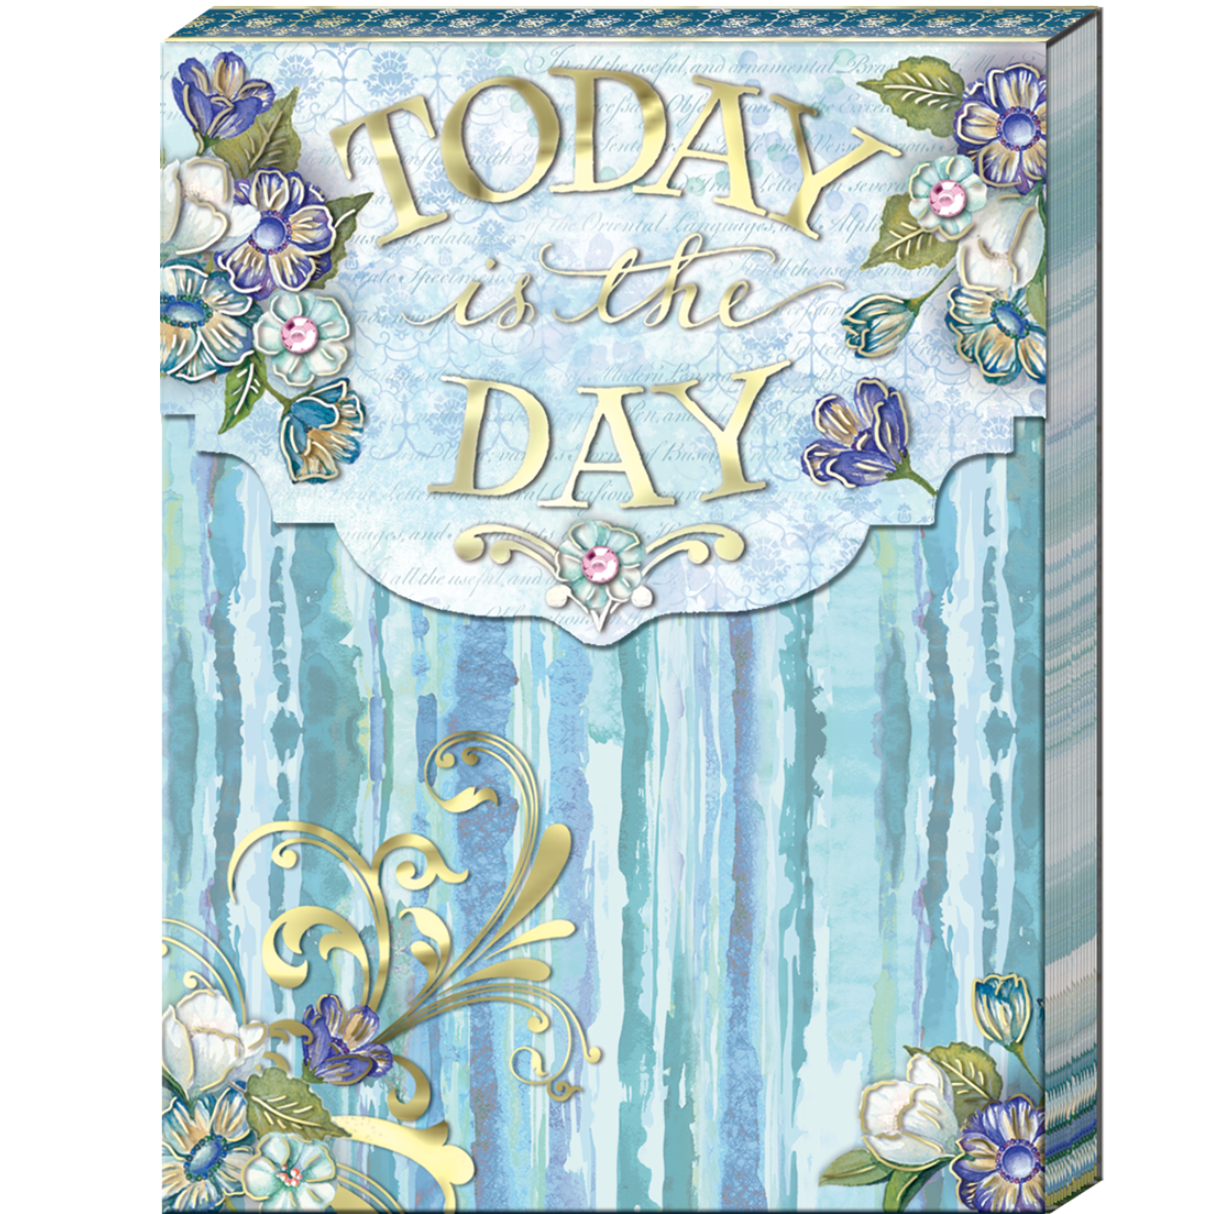 Inspirational Magnetic Pocket Note Pad - Today is the Day